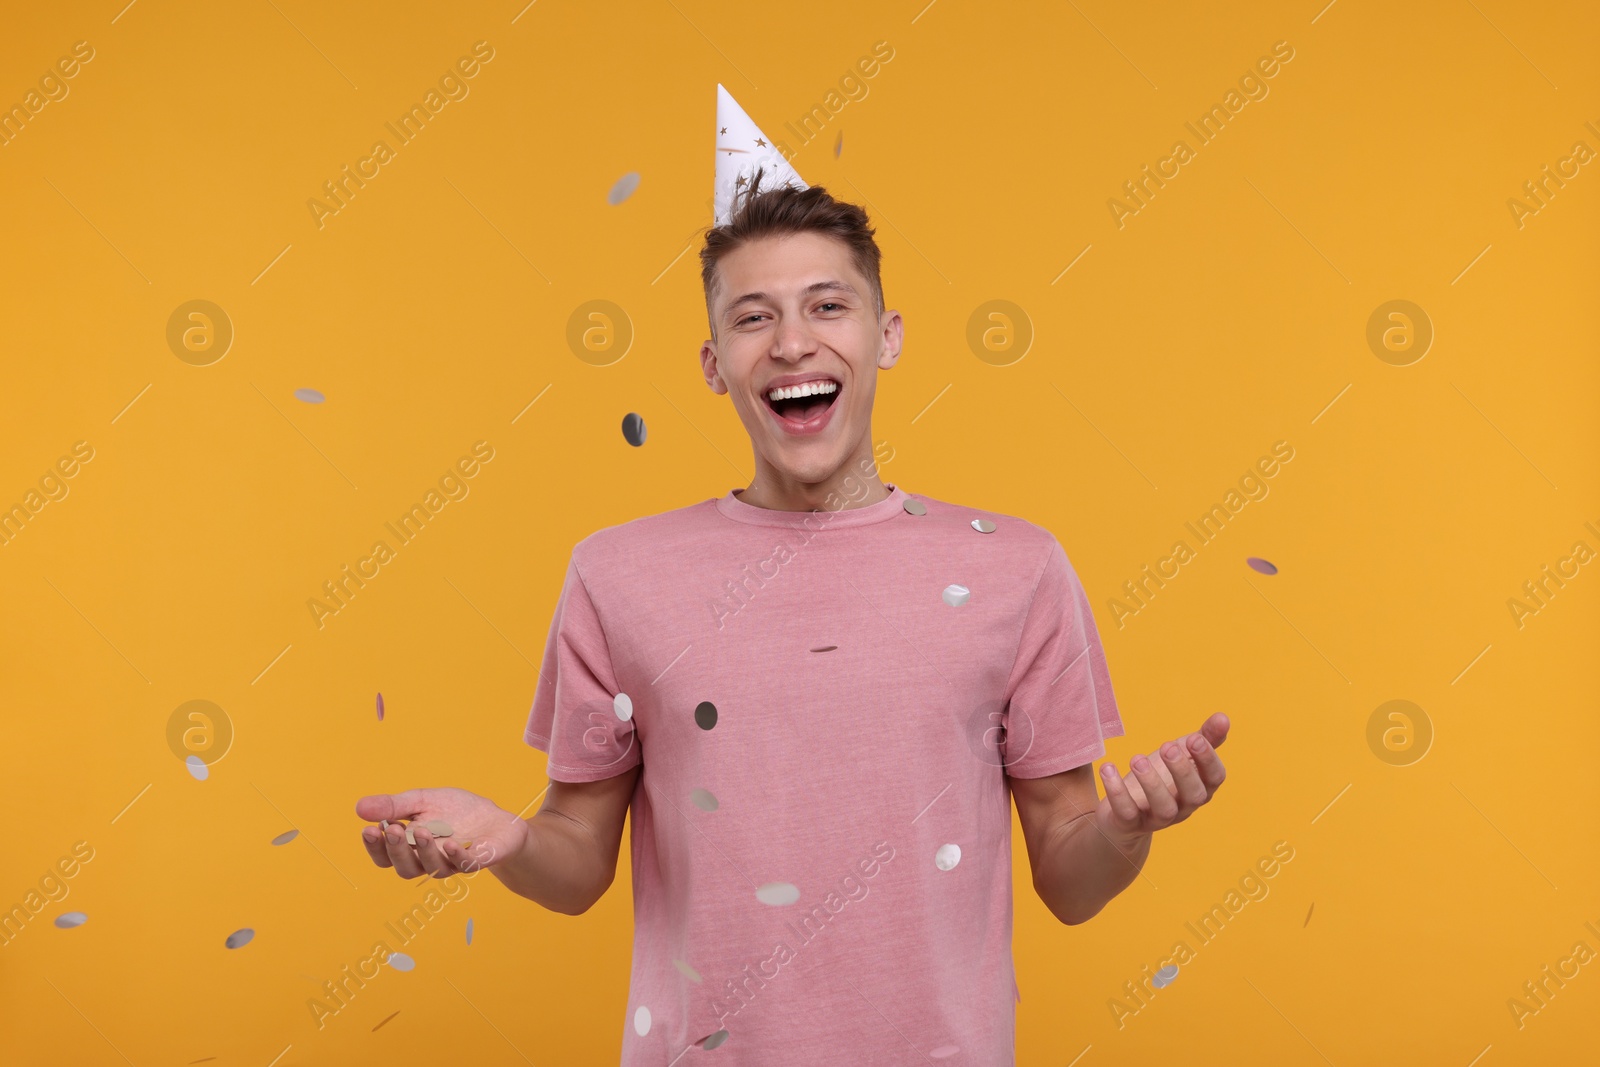 Photo of Happy man in party hat throwing confetti on orange background